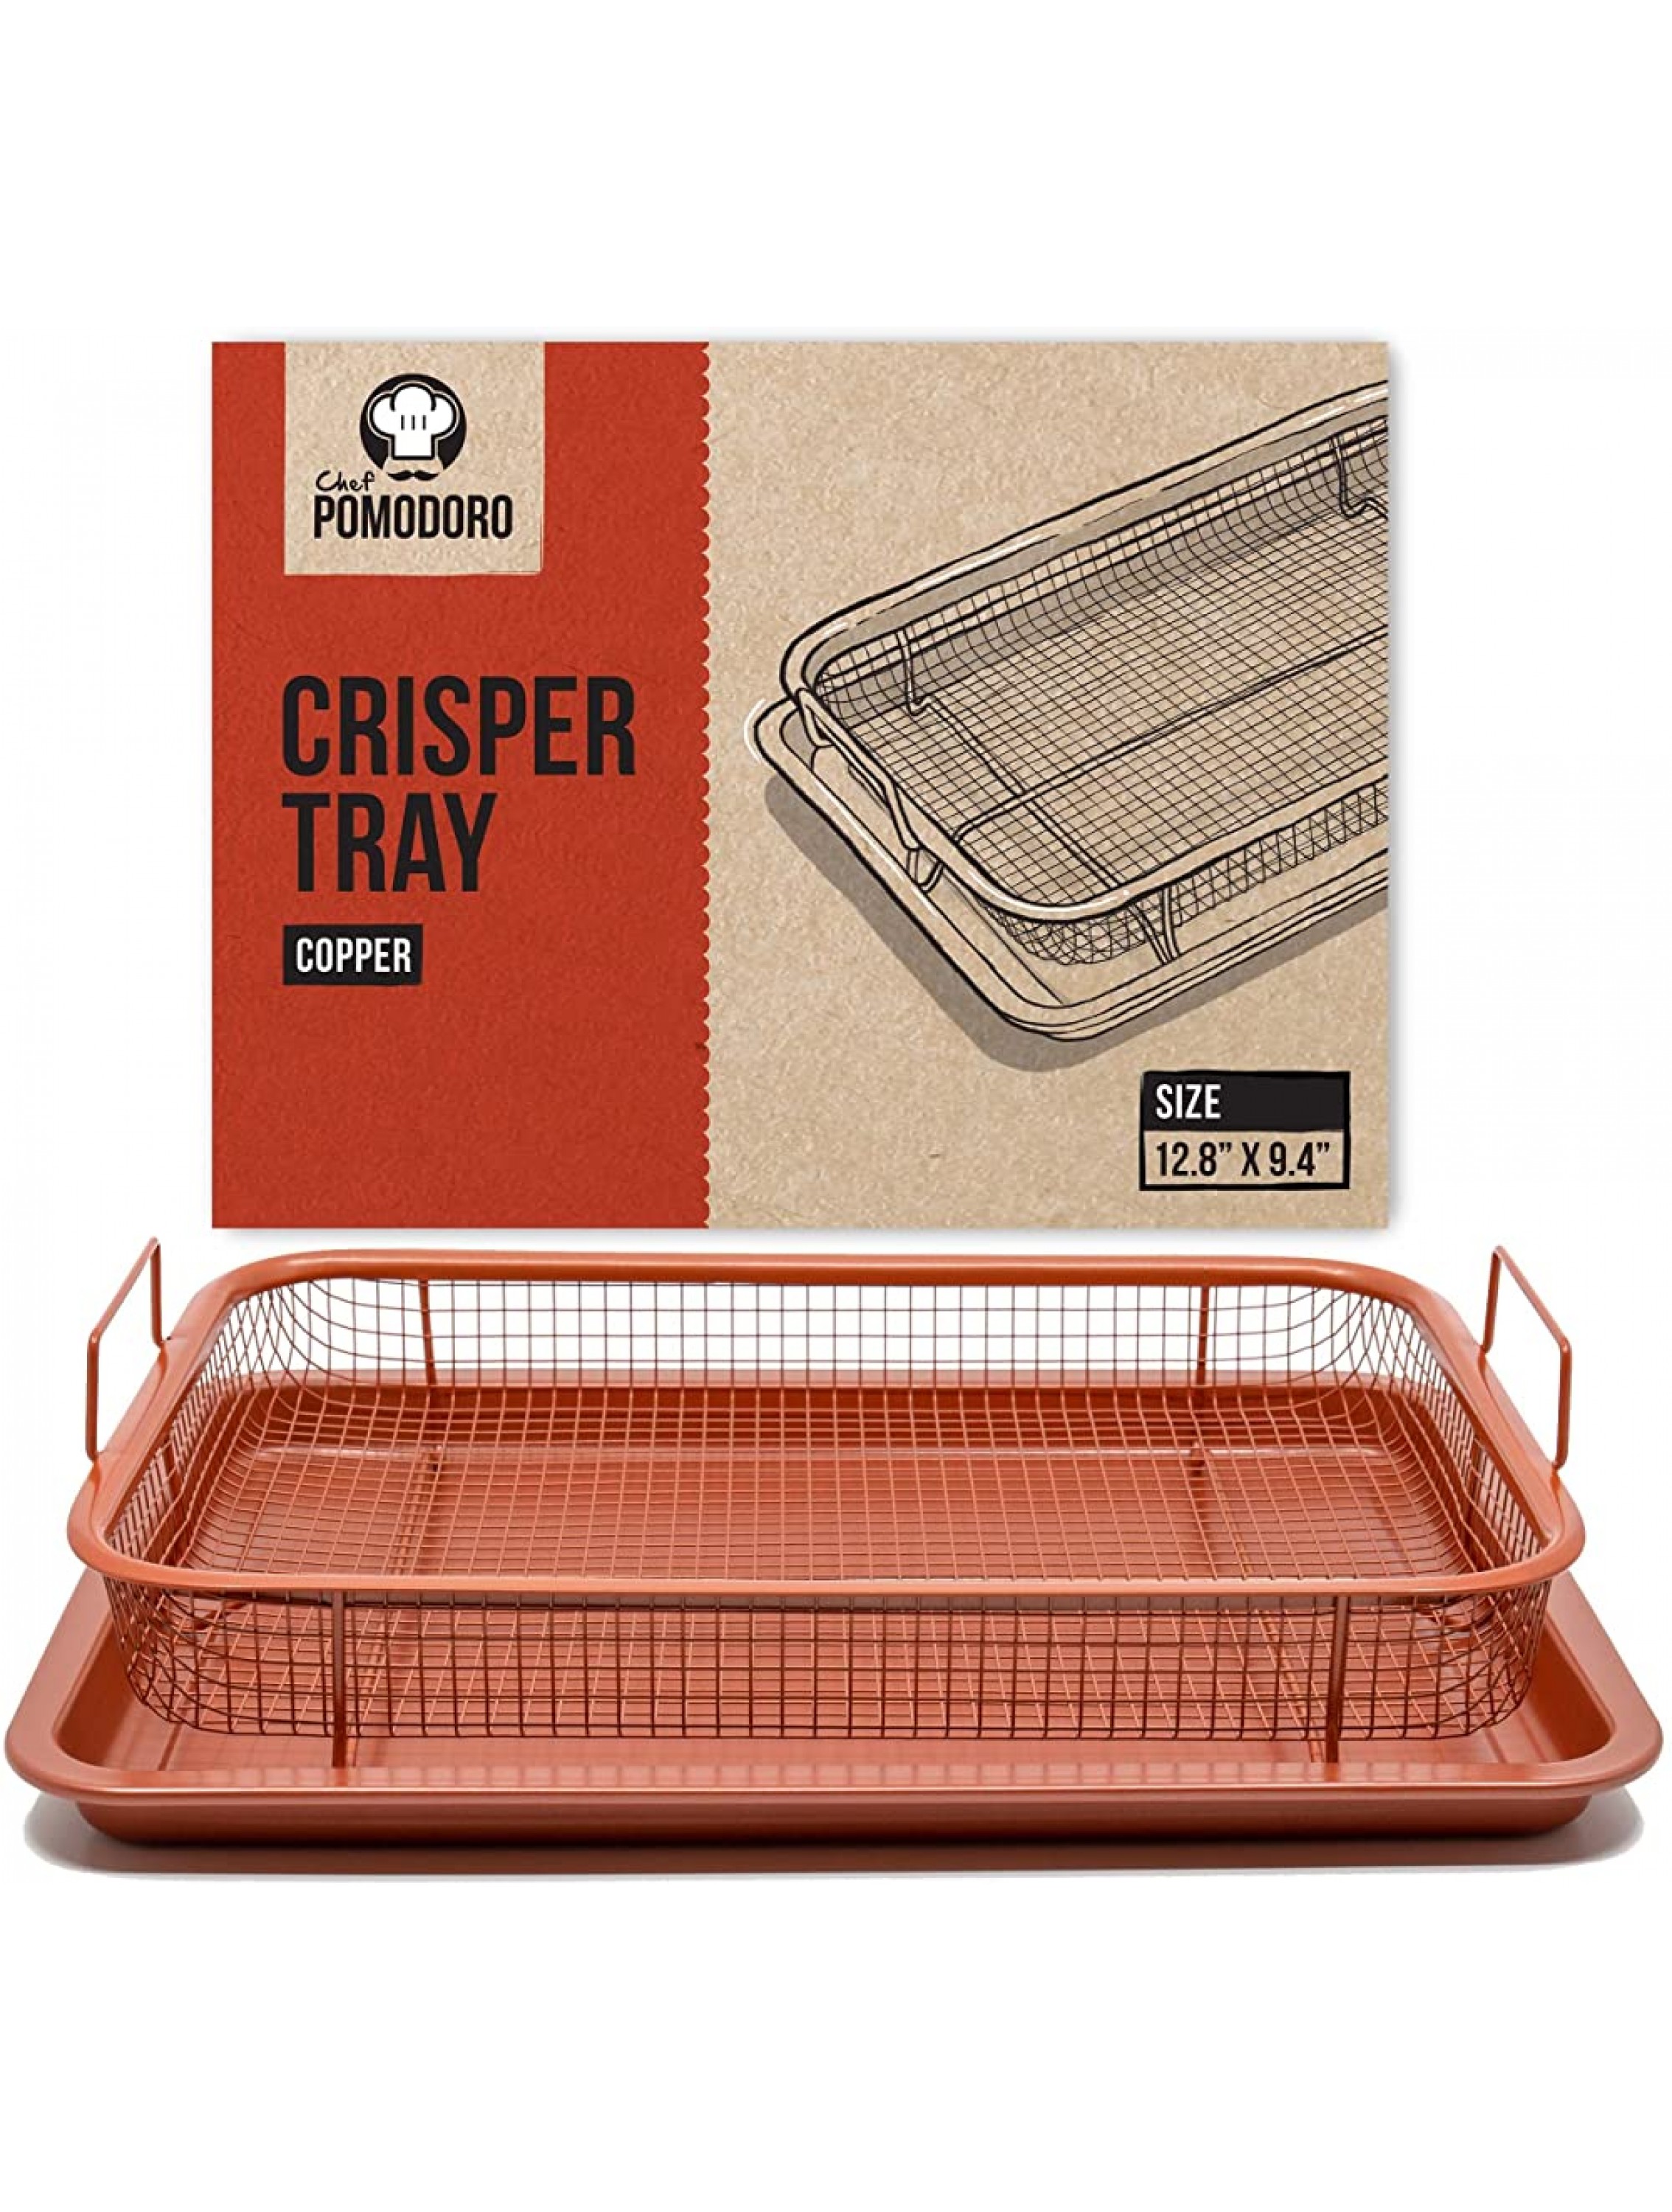 Chef Pomodoro Copper Crisper Tray Deluxe Air Fry in Your Oven 2-Piece Set Baking Pan Rectangle Large - BG5XA2UHS